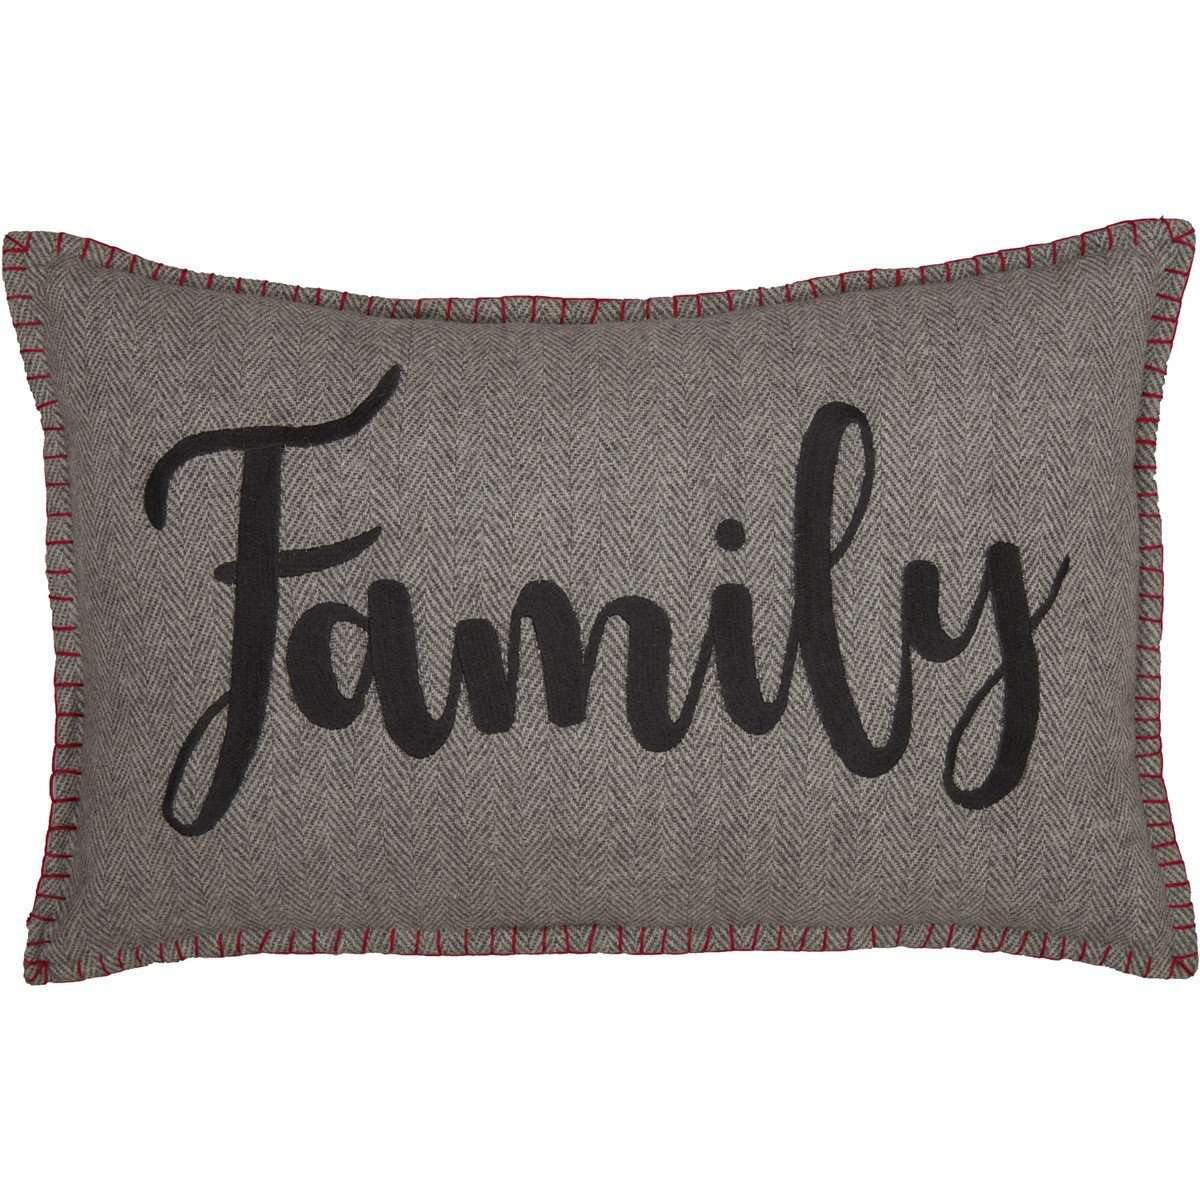 Anderson Family Pillow 14x22 VHC Brands front